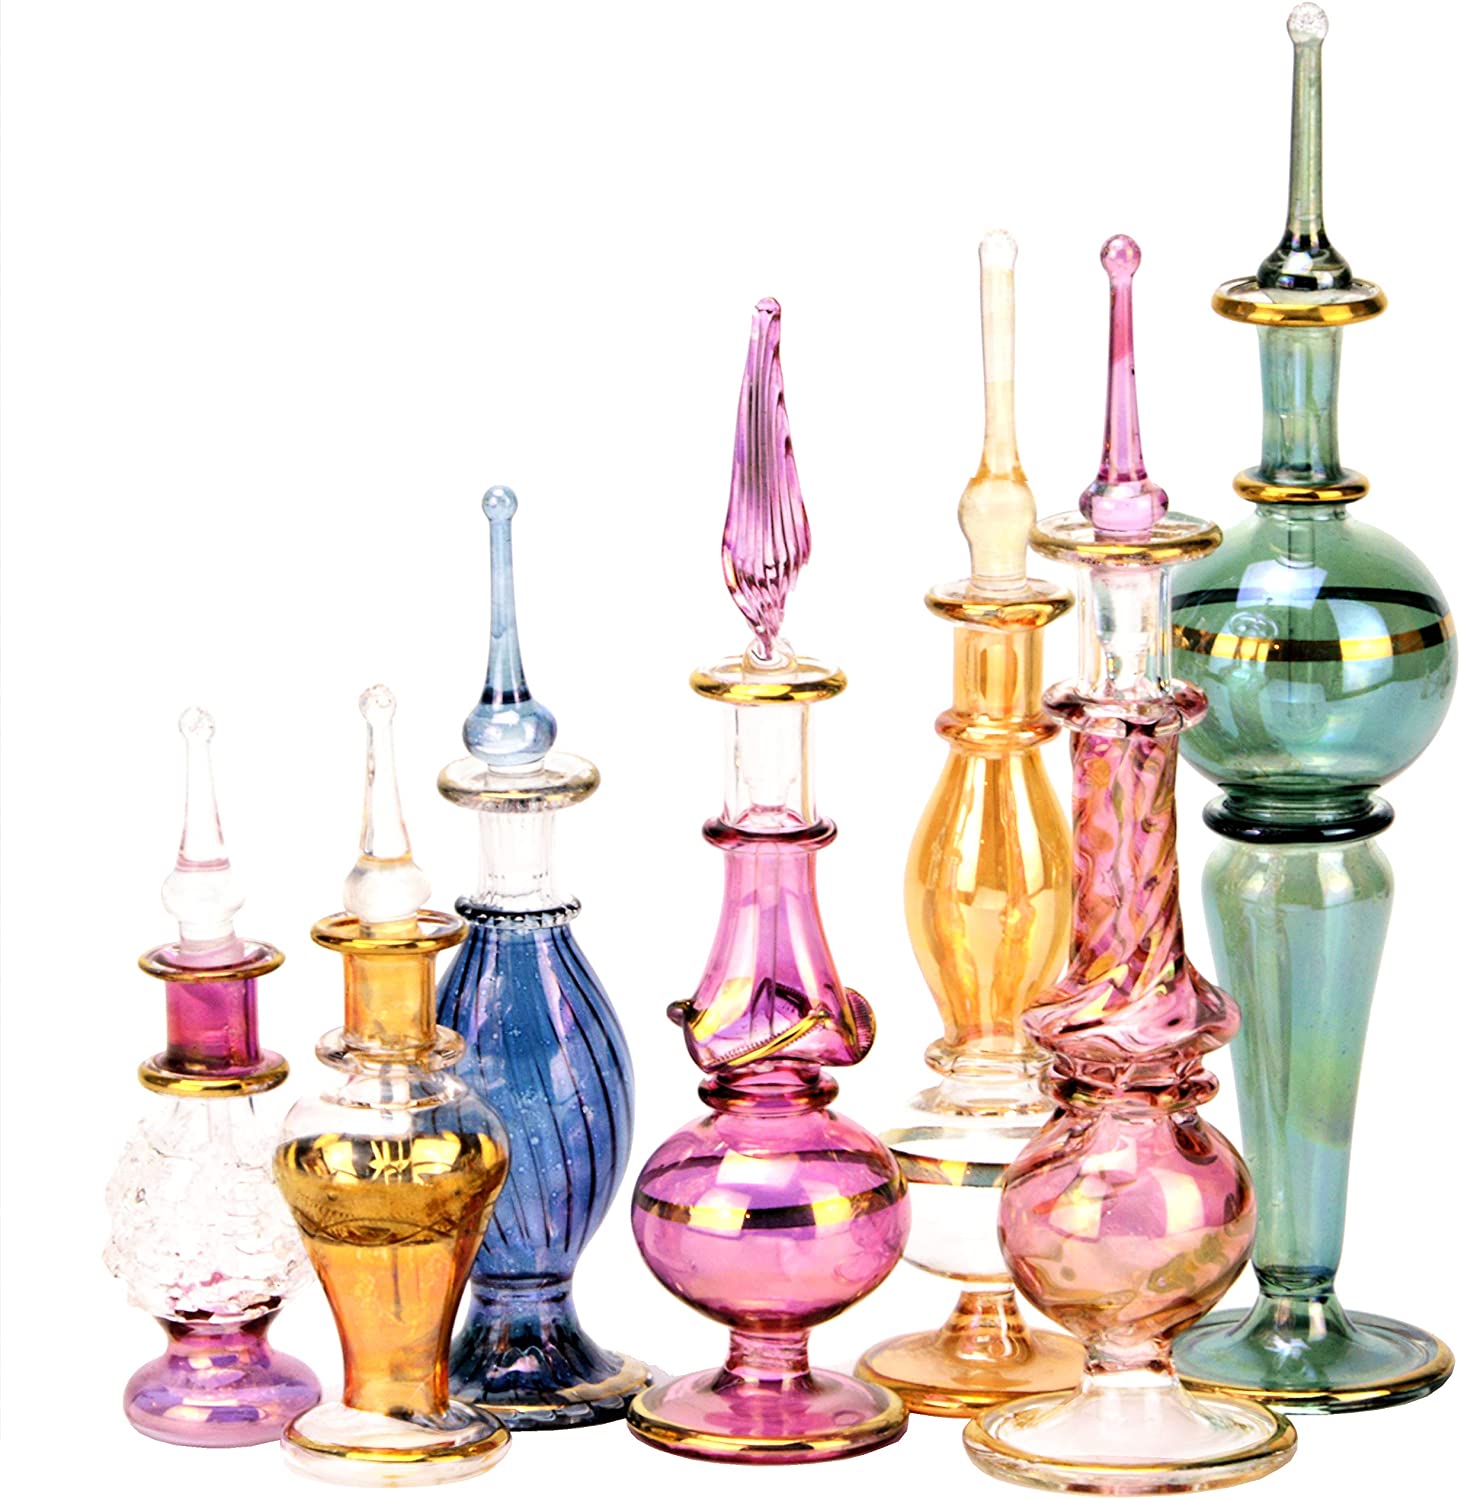 NileCart Egyptian Perfume Bottles Wholesale Mix Collection Set of 12 Hand Blown Decorative Pyrex Glass 2-5 in with Handmade Golden Egyptian Decoration for Perfumes & Essential Oils